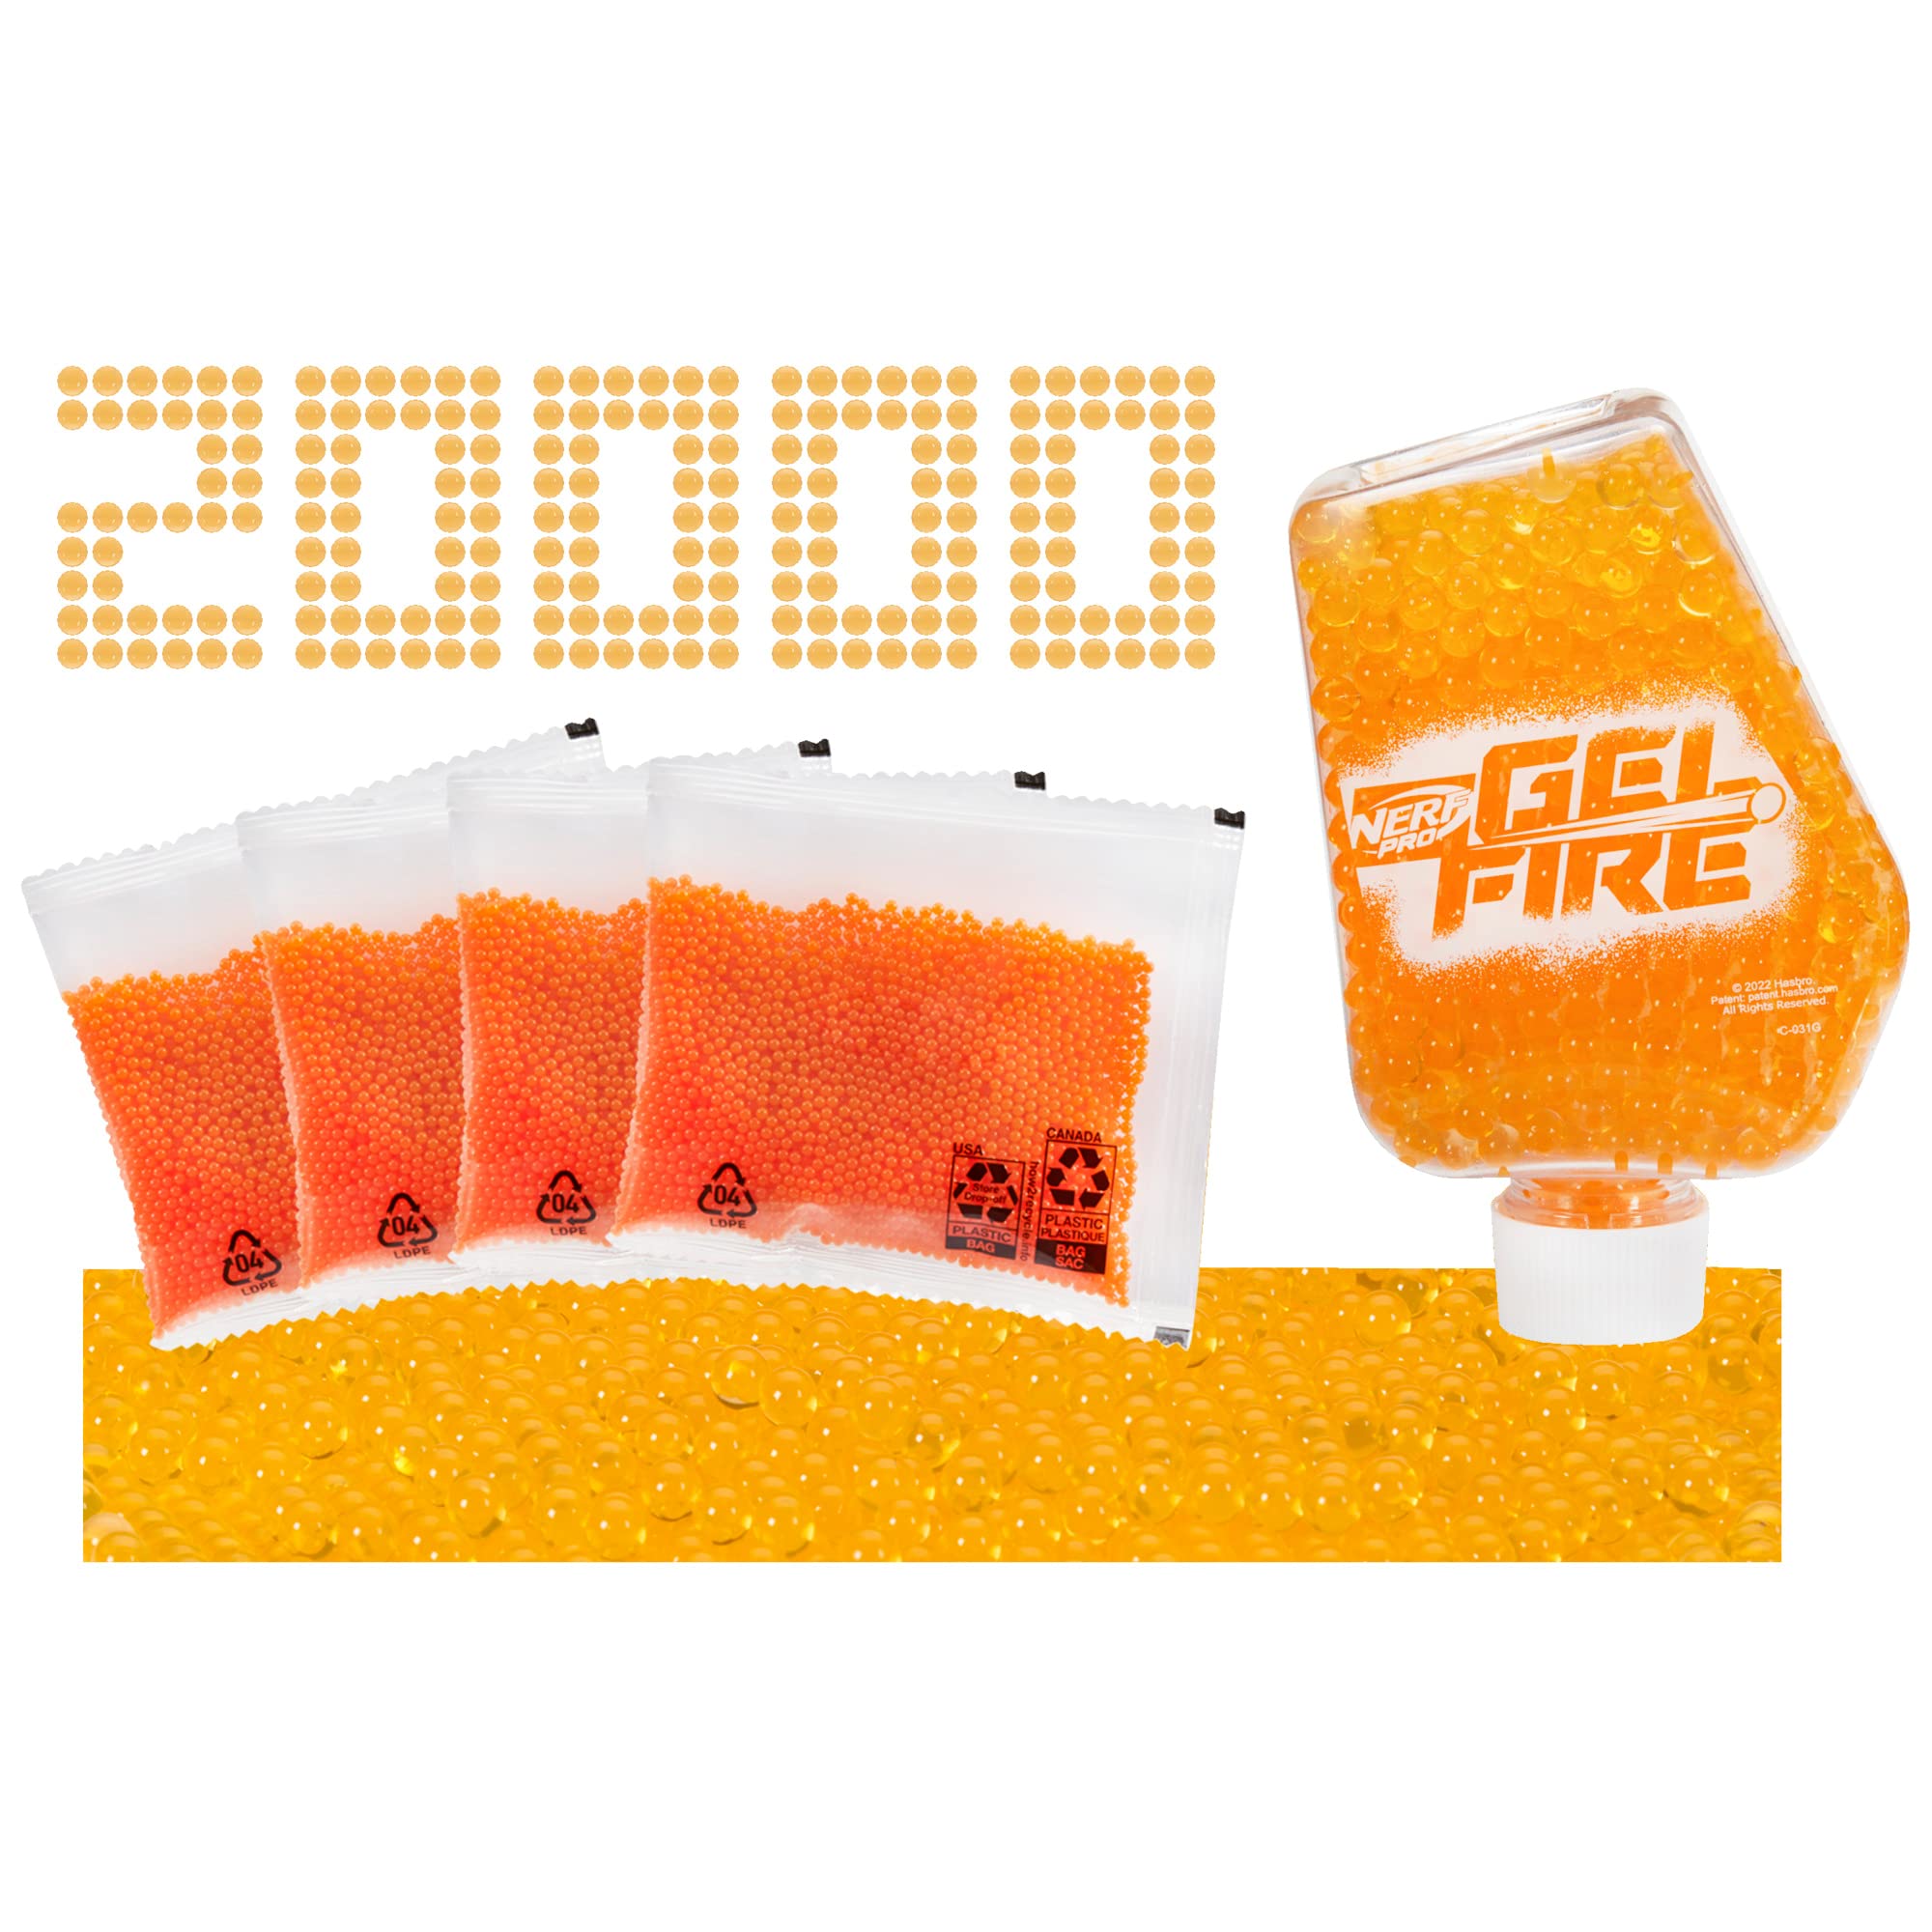 NERF Pro Gelfire Refill, 20,000 Dehydrated Gelfire Rounds, 1x 800 Round Hopper, Use Pro Gelfire Blasters, Ages 14 & Up